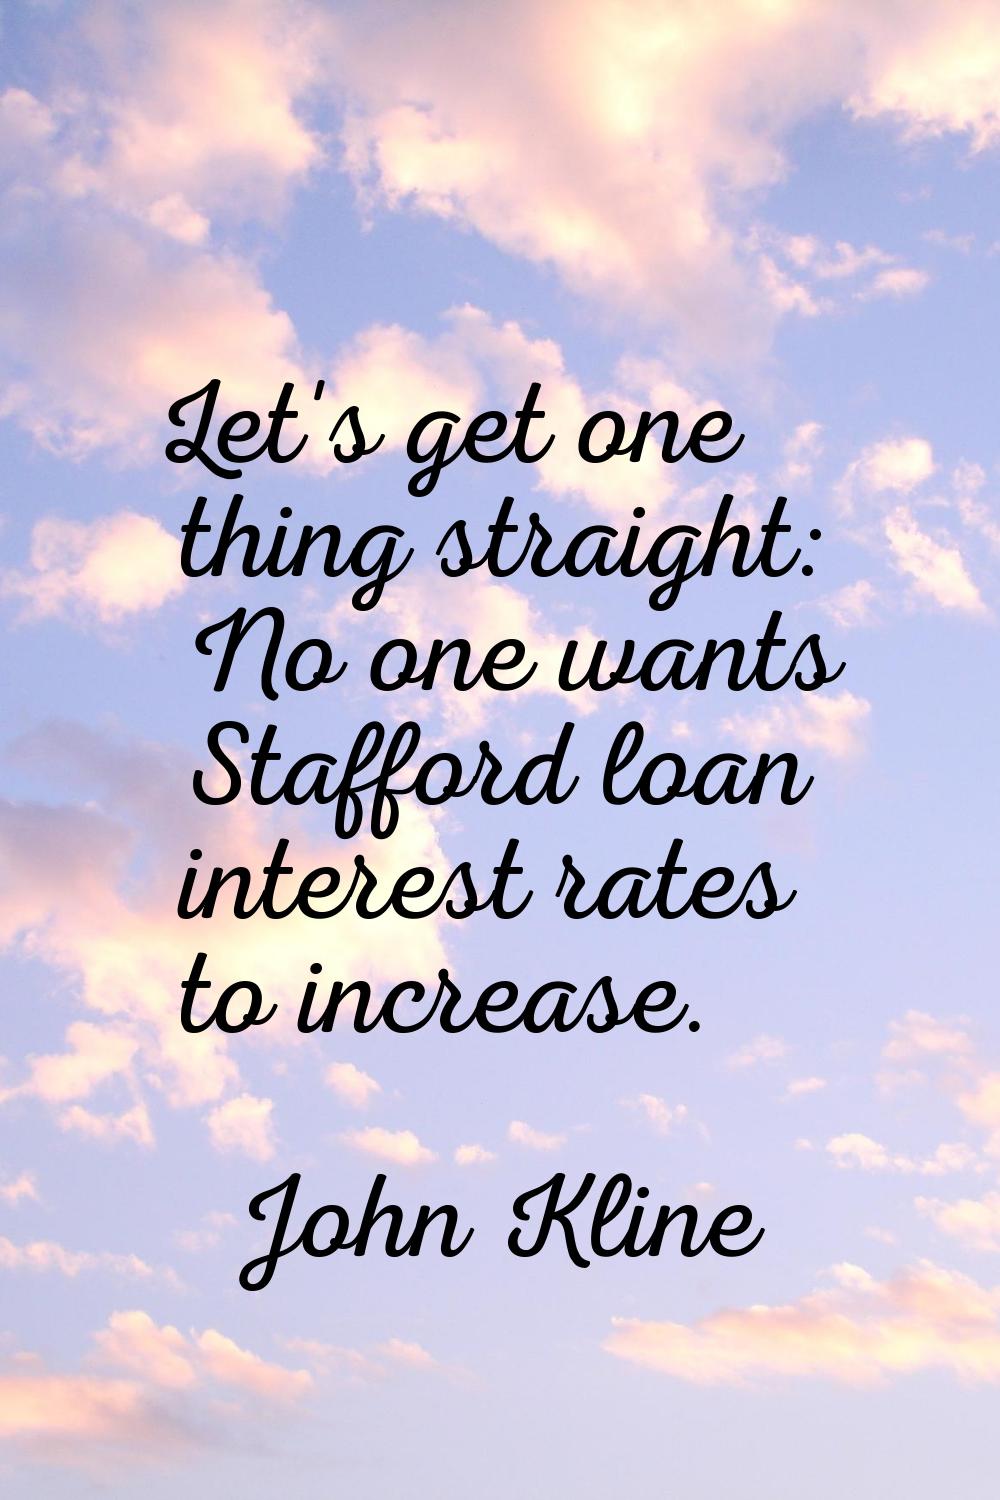 Let's get one thing straight: No one wants Stafford loan interest rates to increase.